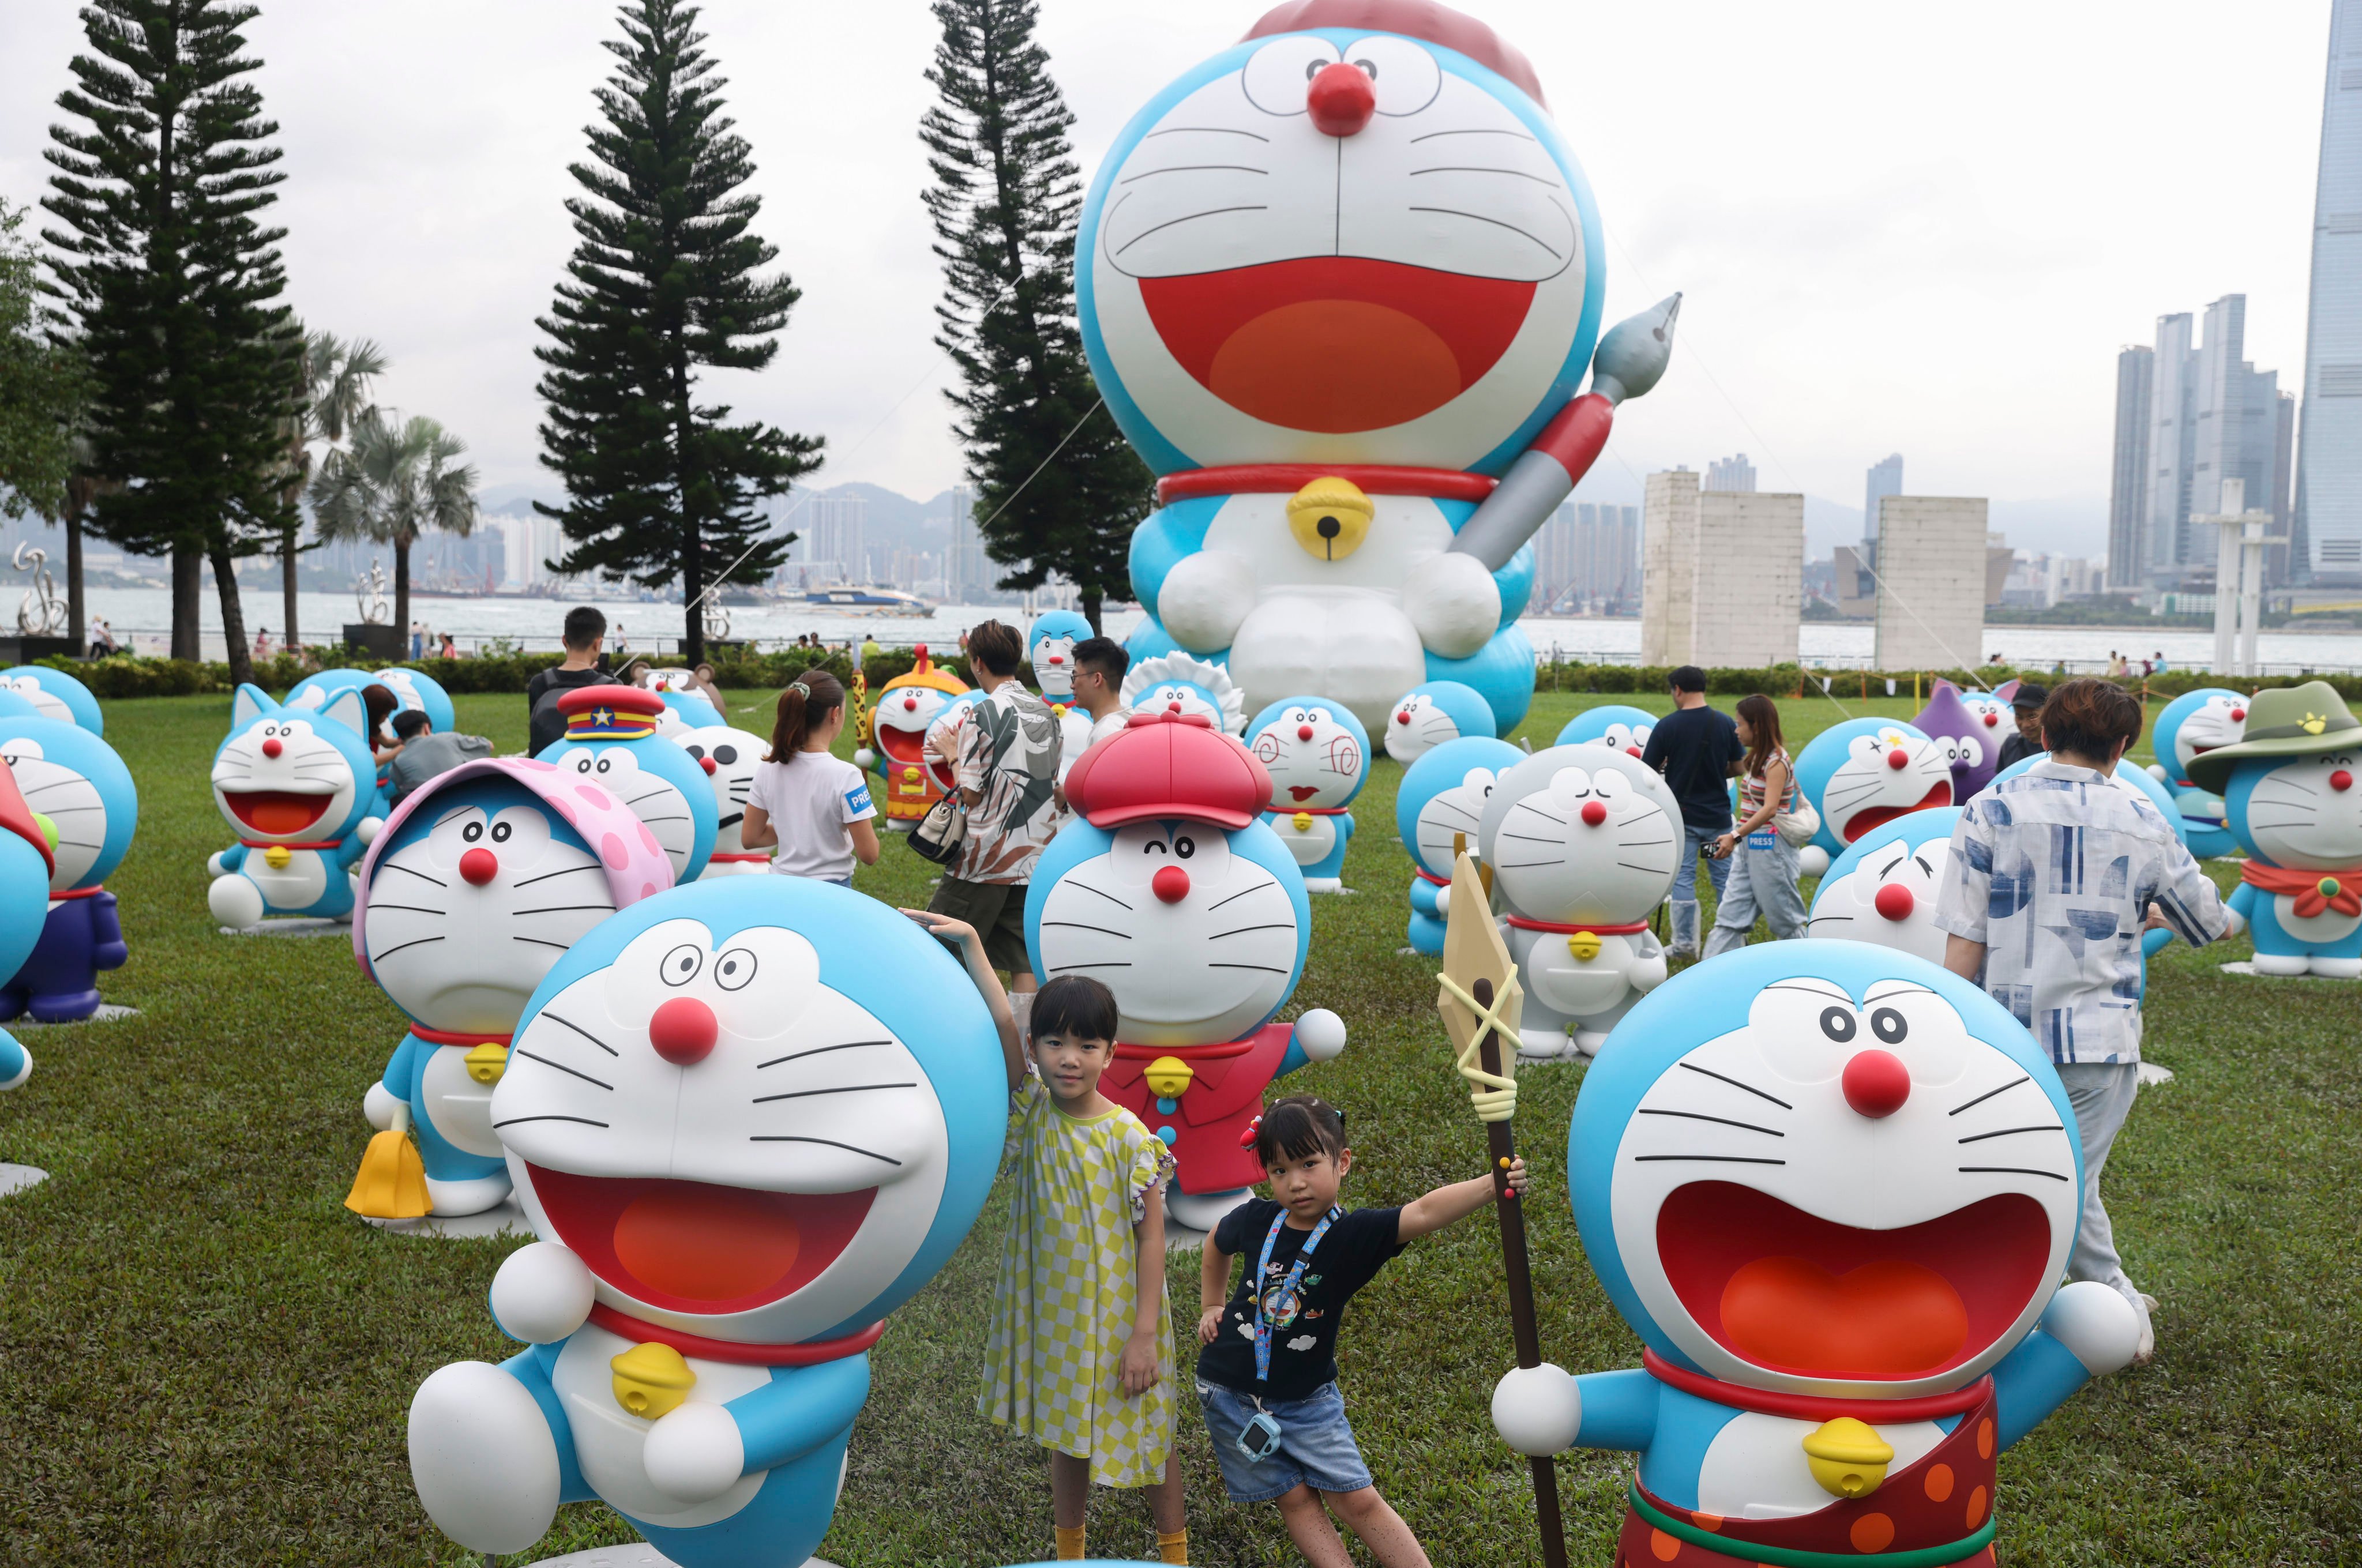 Visitors pose for pictures with statues of Japanese cartoon character Doraemon during the “100% Doraemon & Friends” tour in Sai Ying Pun on May 25. Photo: Yik Yeung-man